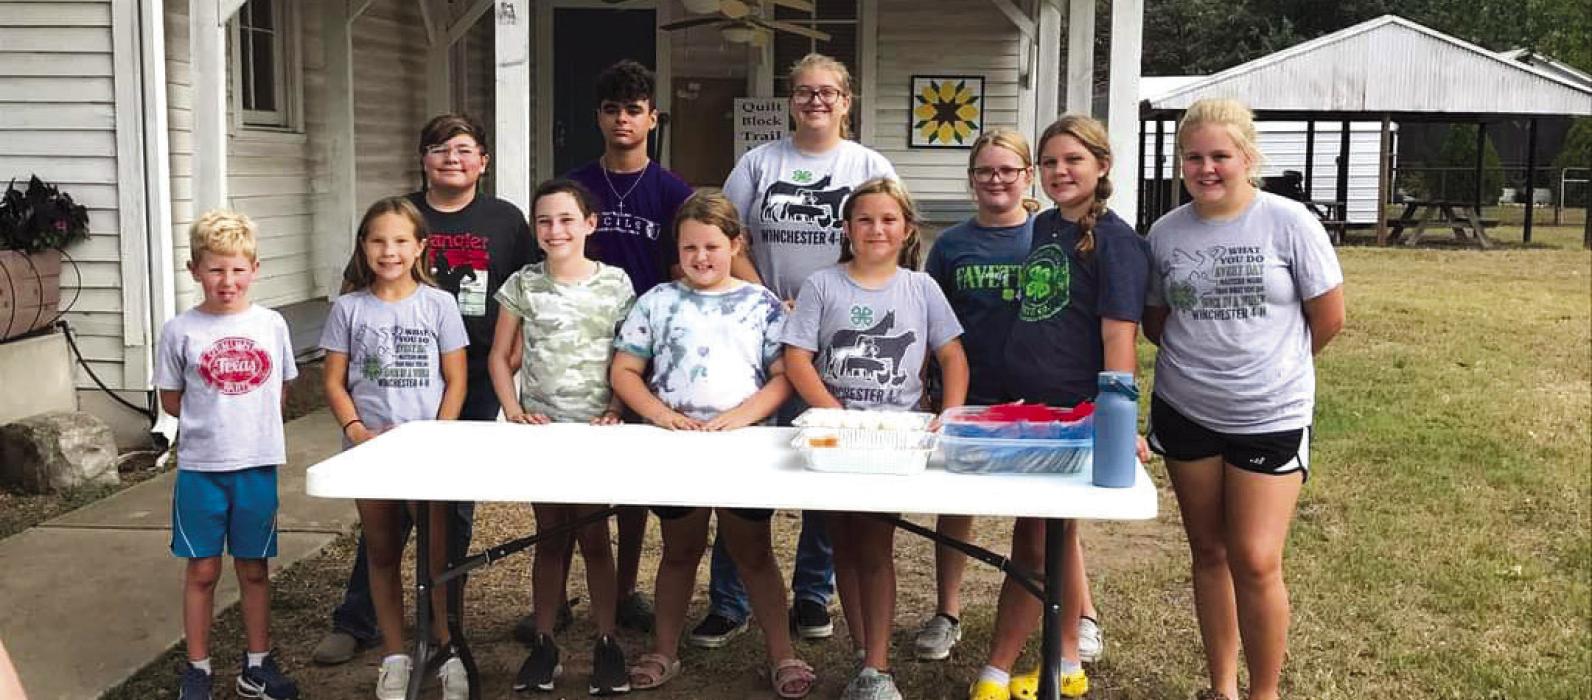 Winchester 4-H held its annual Spaghetti Dinner Drive Thru this past Sunday in conjunction with the Winchester Area Civic Association. All proceeds go to the 4-H Club. Pictured (front, from left) are: Grant Fryer, Lily Herzog, Grace Embesi, Embri Gooch, Saydee Hart, Raynee Hart, Addison Fryer (back) row. Judah Odom, Grayson Hart, Brazos Vick, and Blair Gooch.